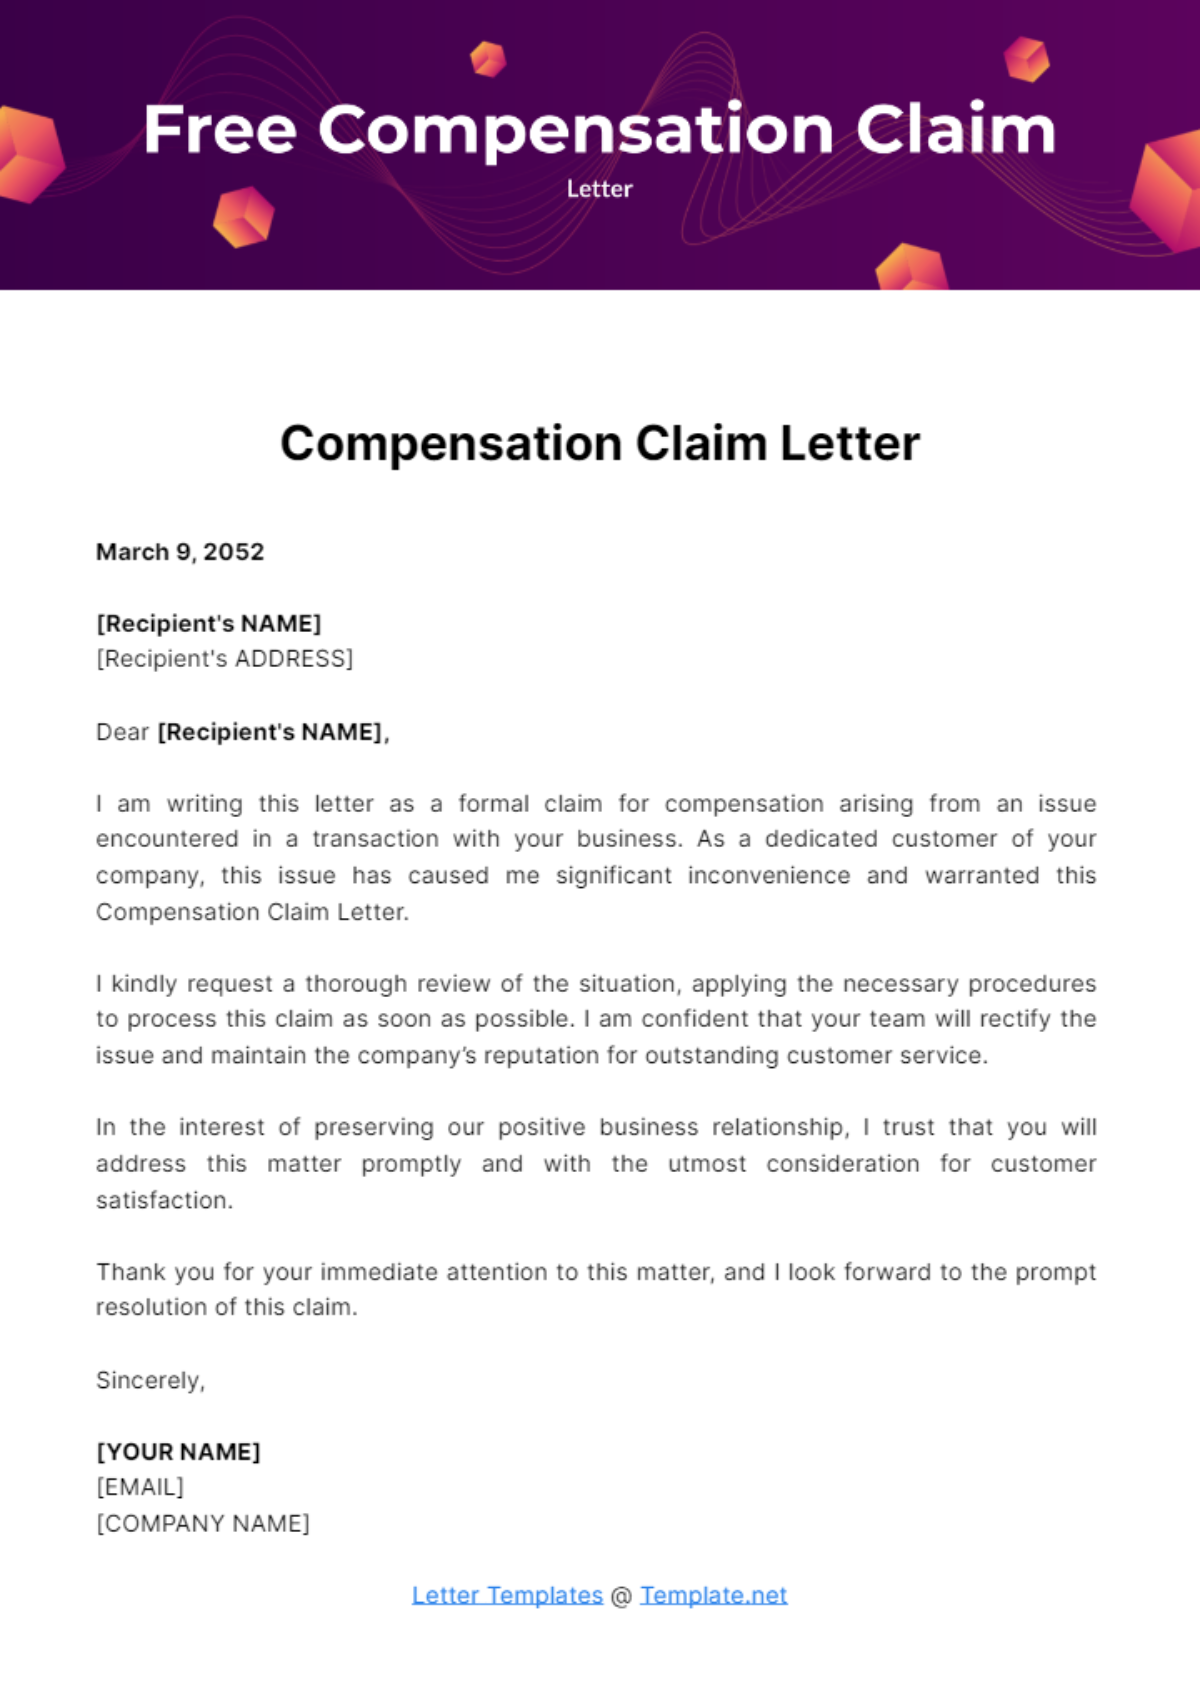 Free Compensation Claim Letter Template